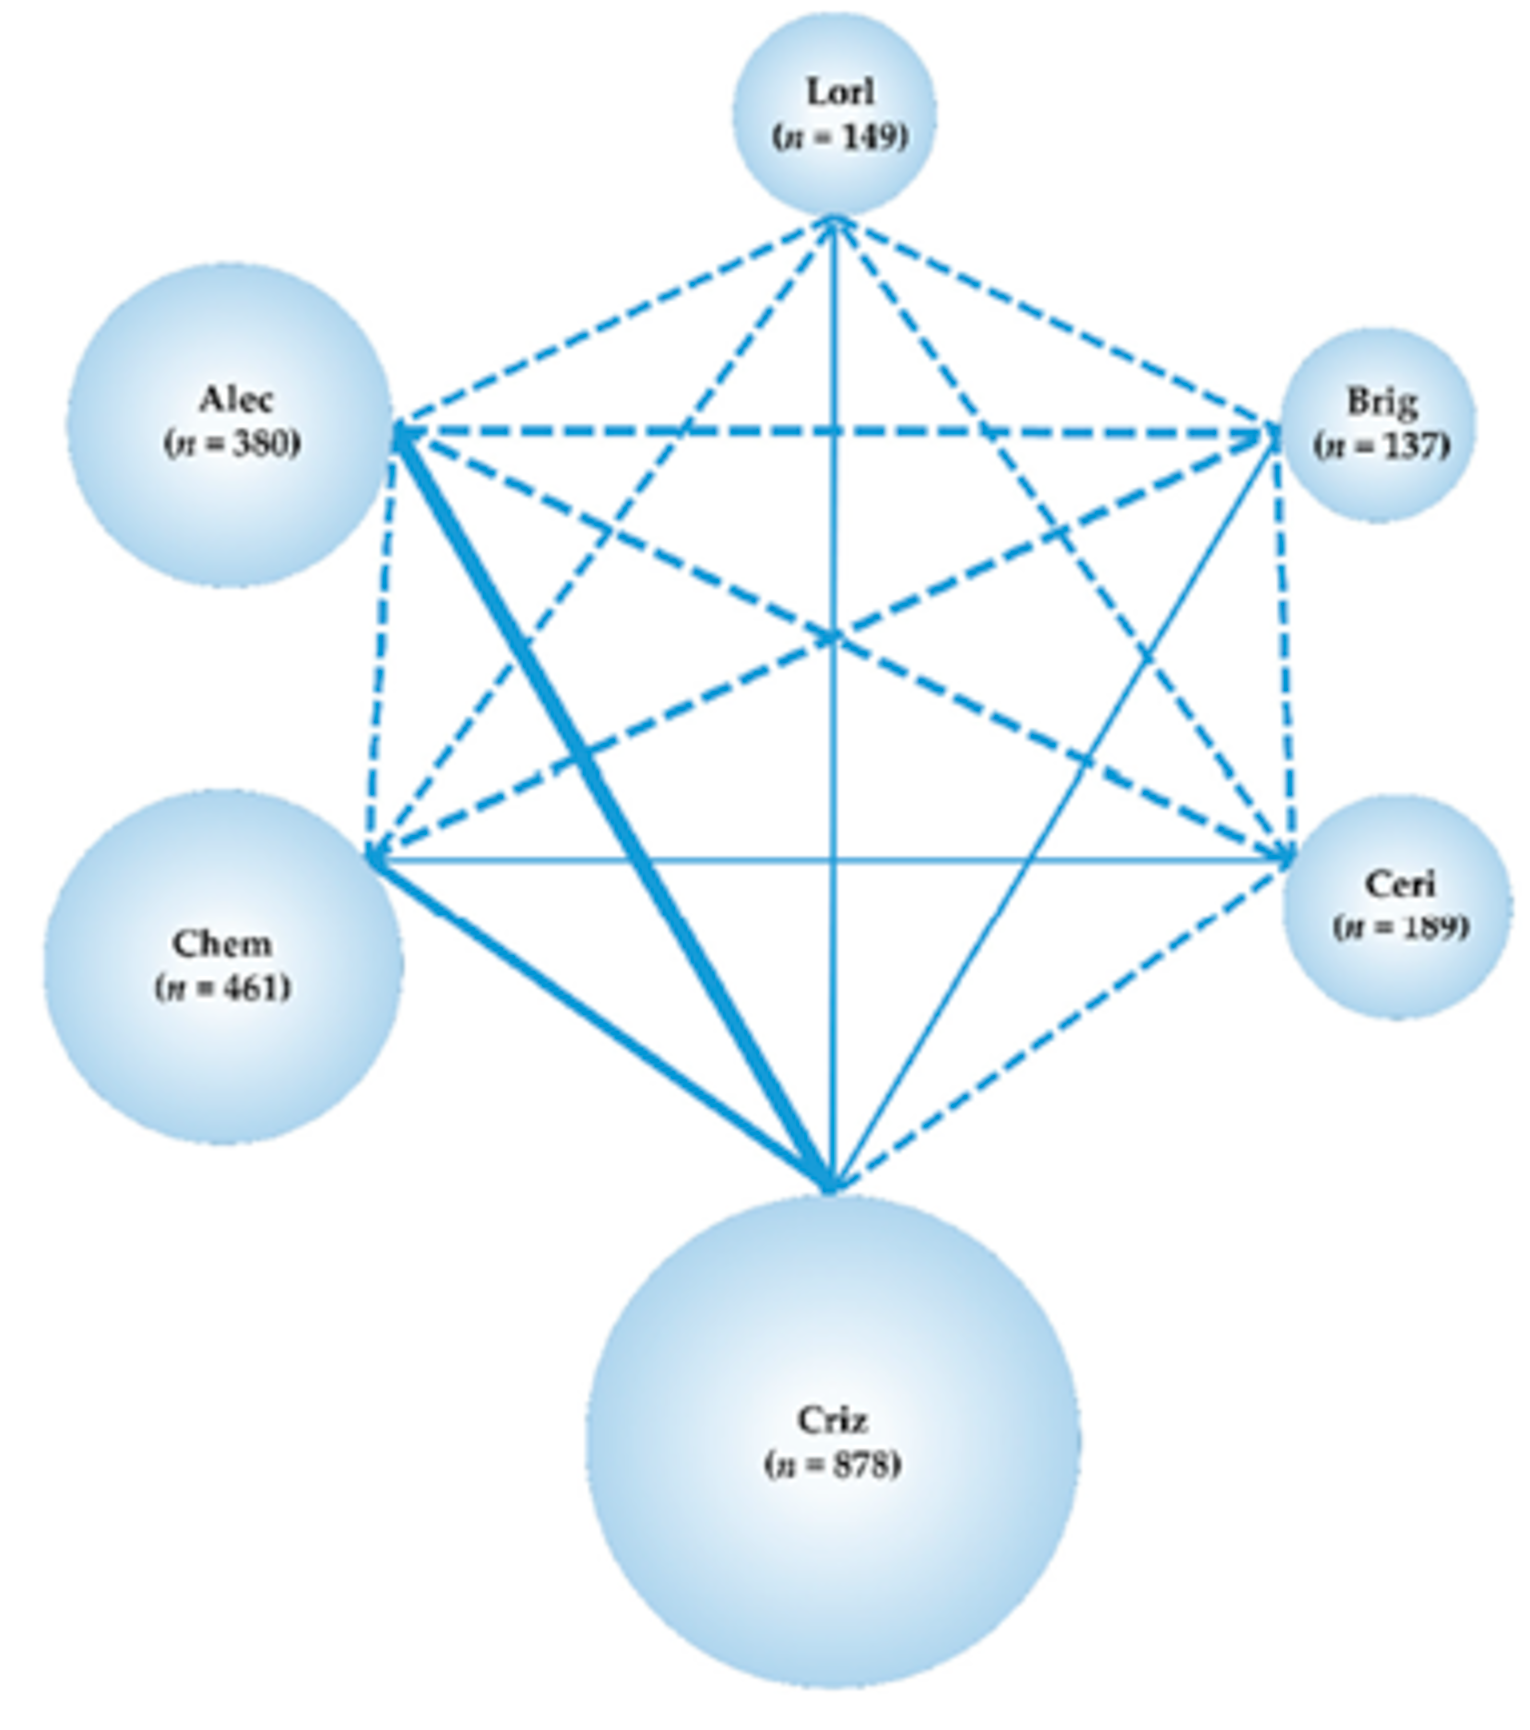 Network diagram of trials included in the indirect treatment comparison published by Ando et al. (2021).